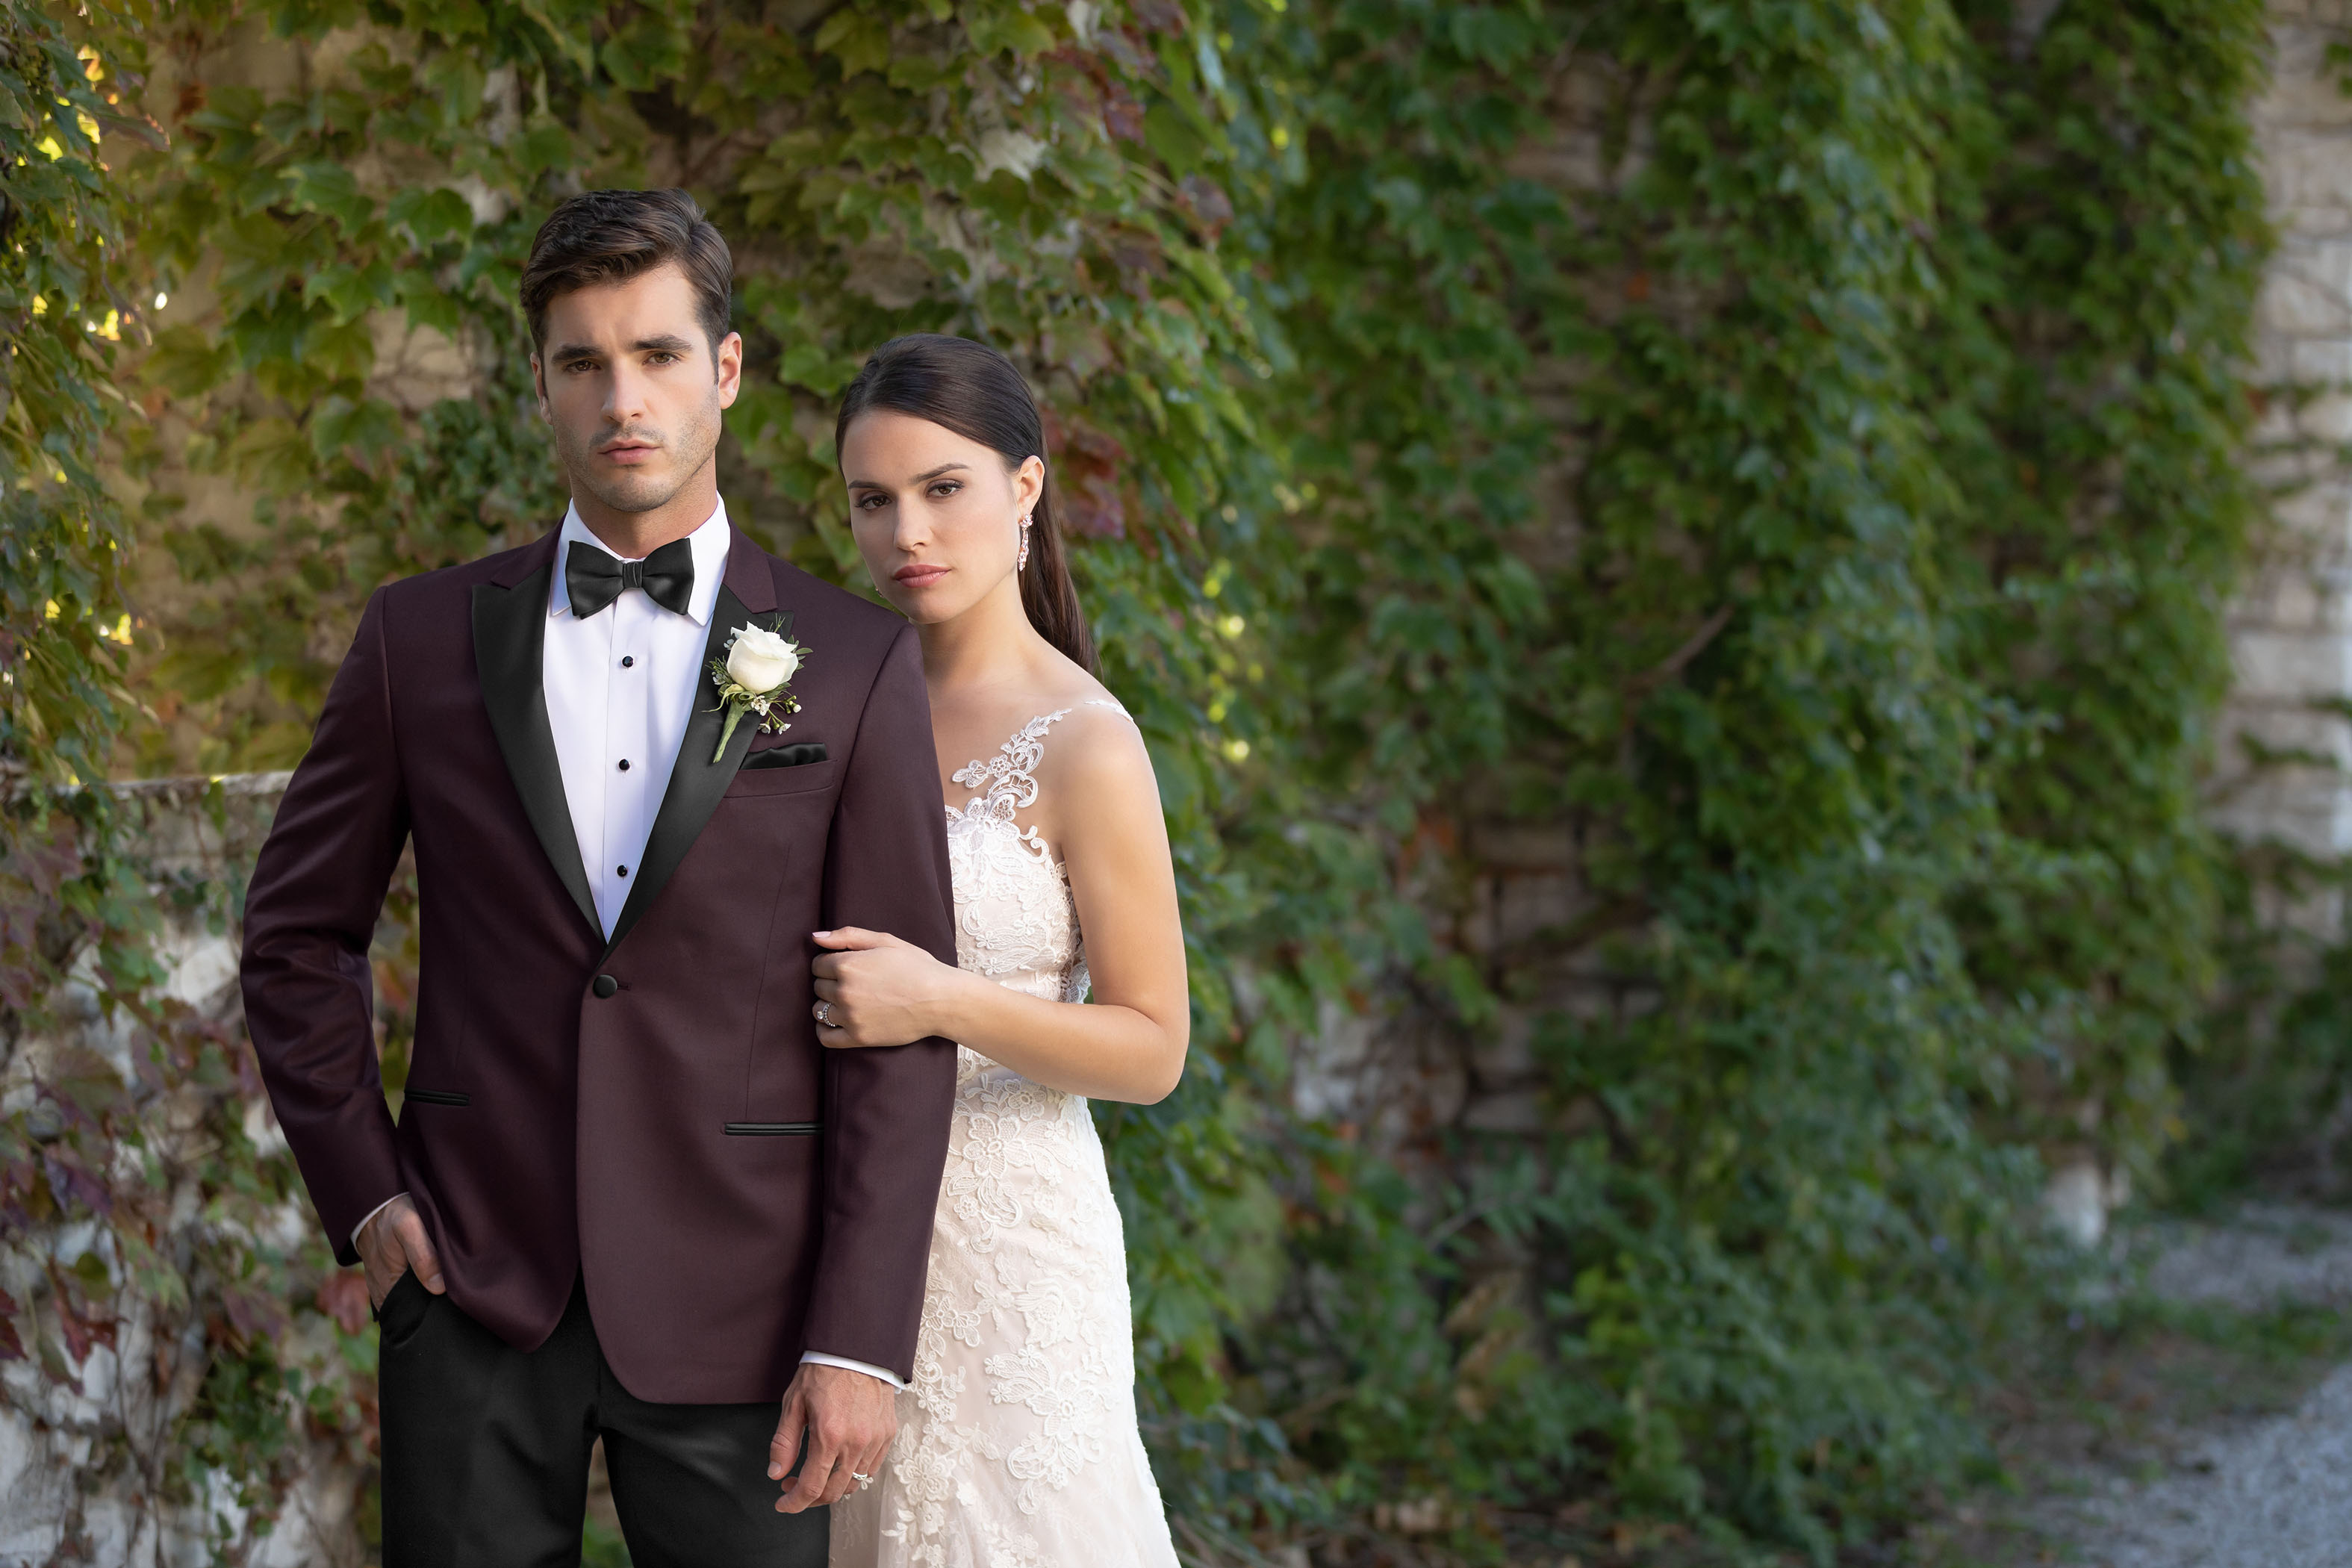 Non-traditional wedding looks - Groom and bride, groom wearing a burgundy tuxedo